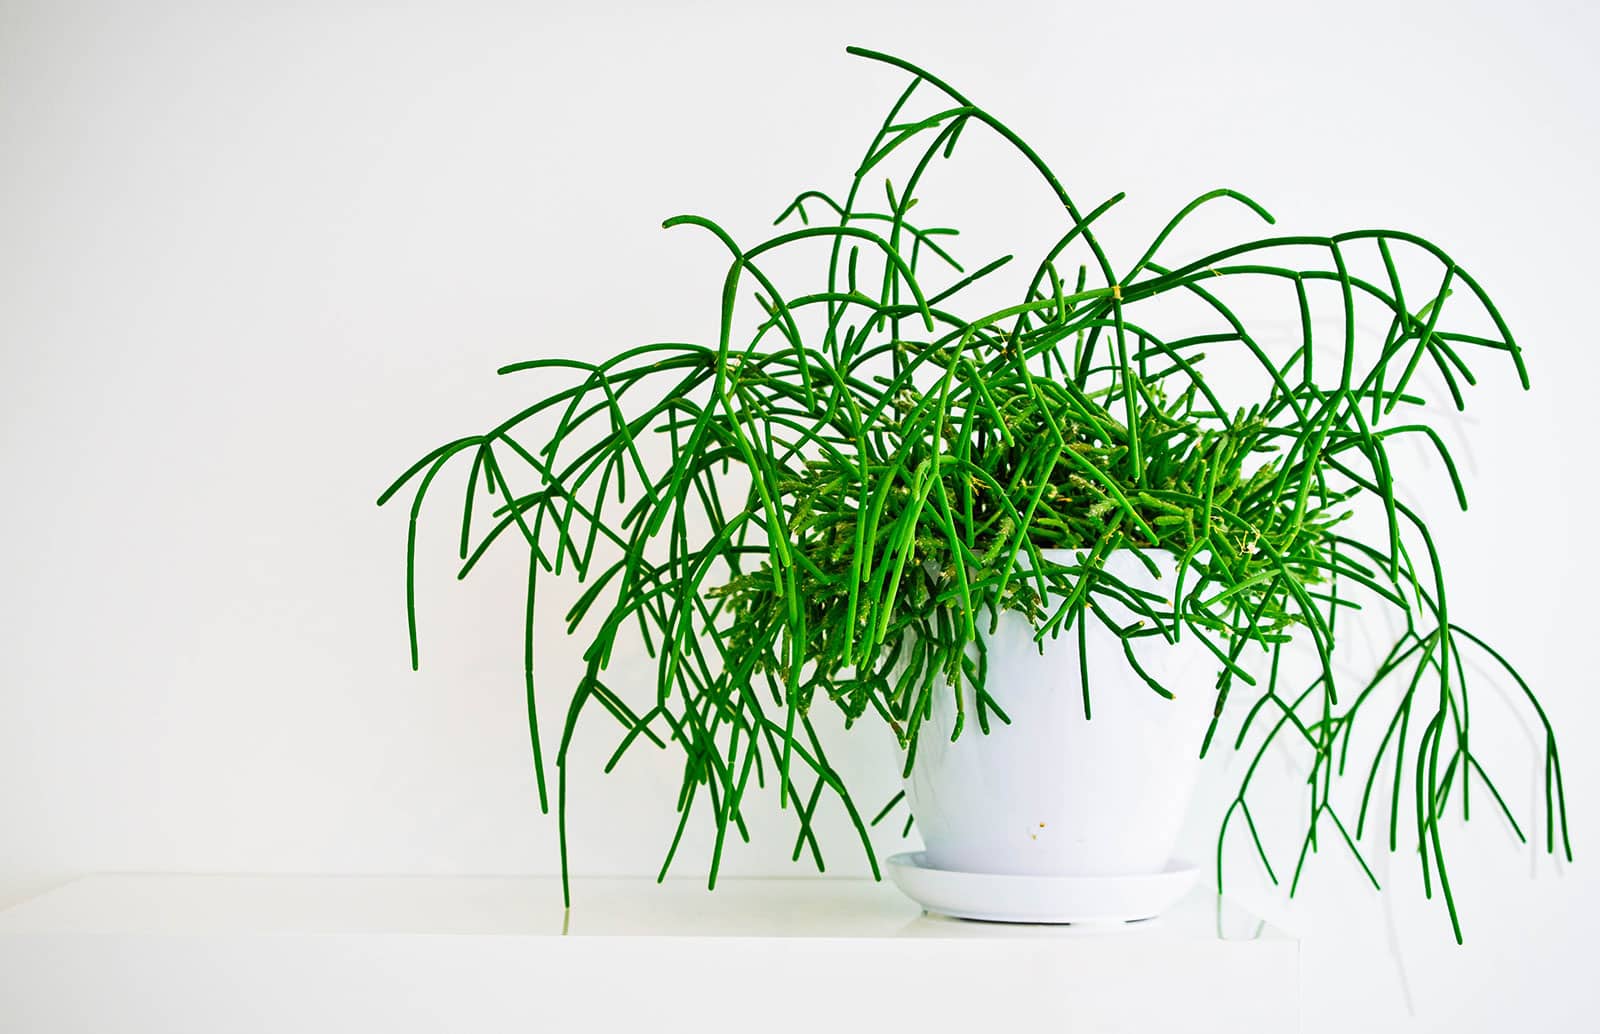 Rhipsalis plant (coral cactus) in a white pot against a white backdrop